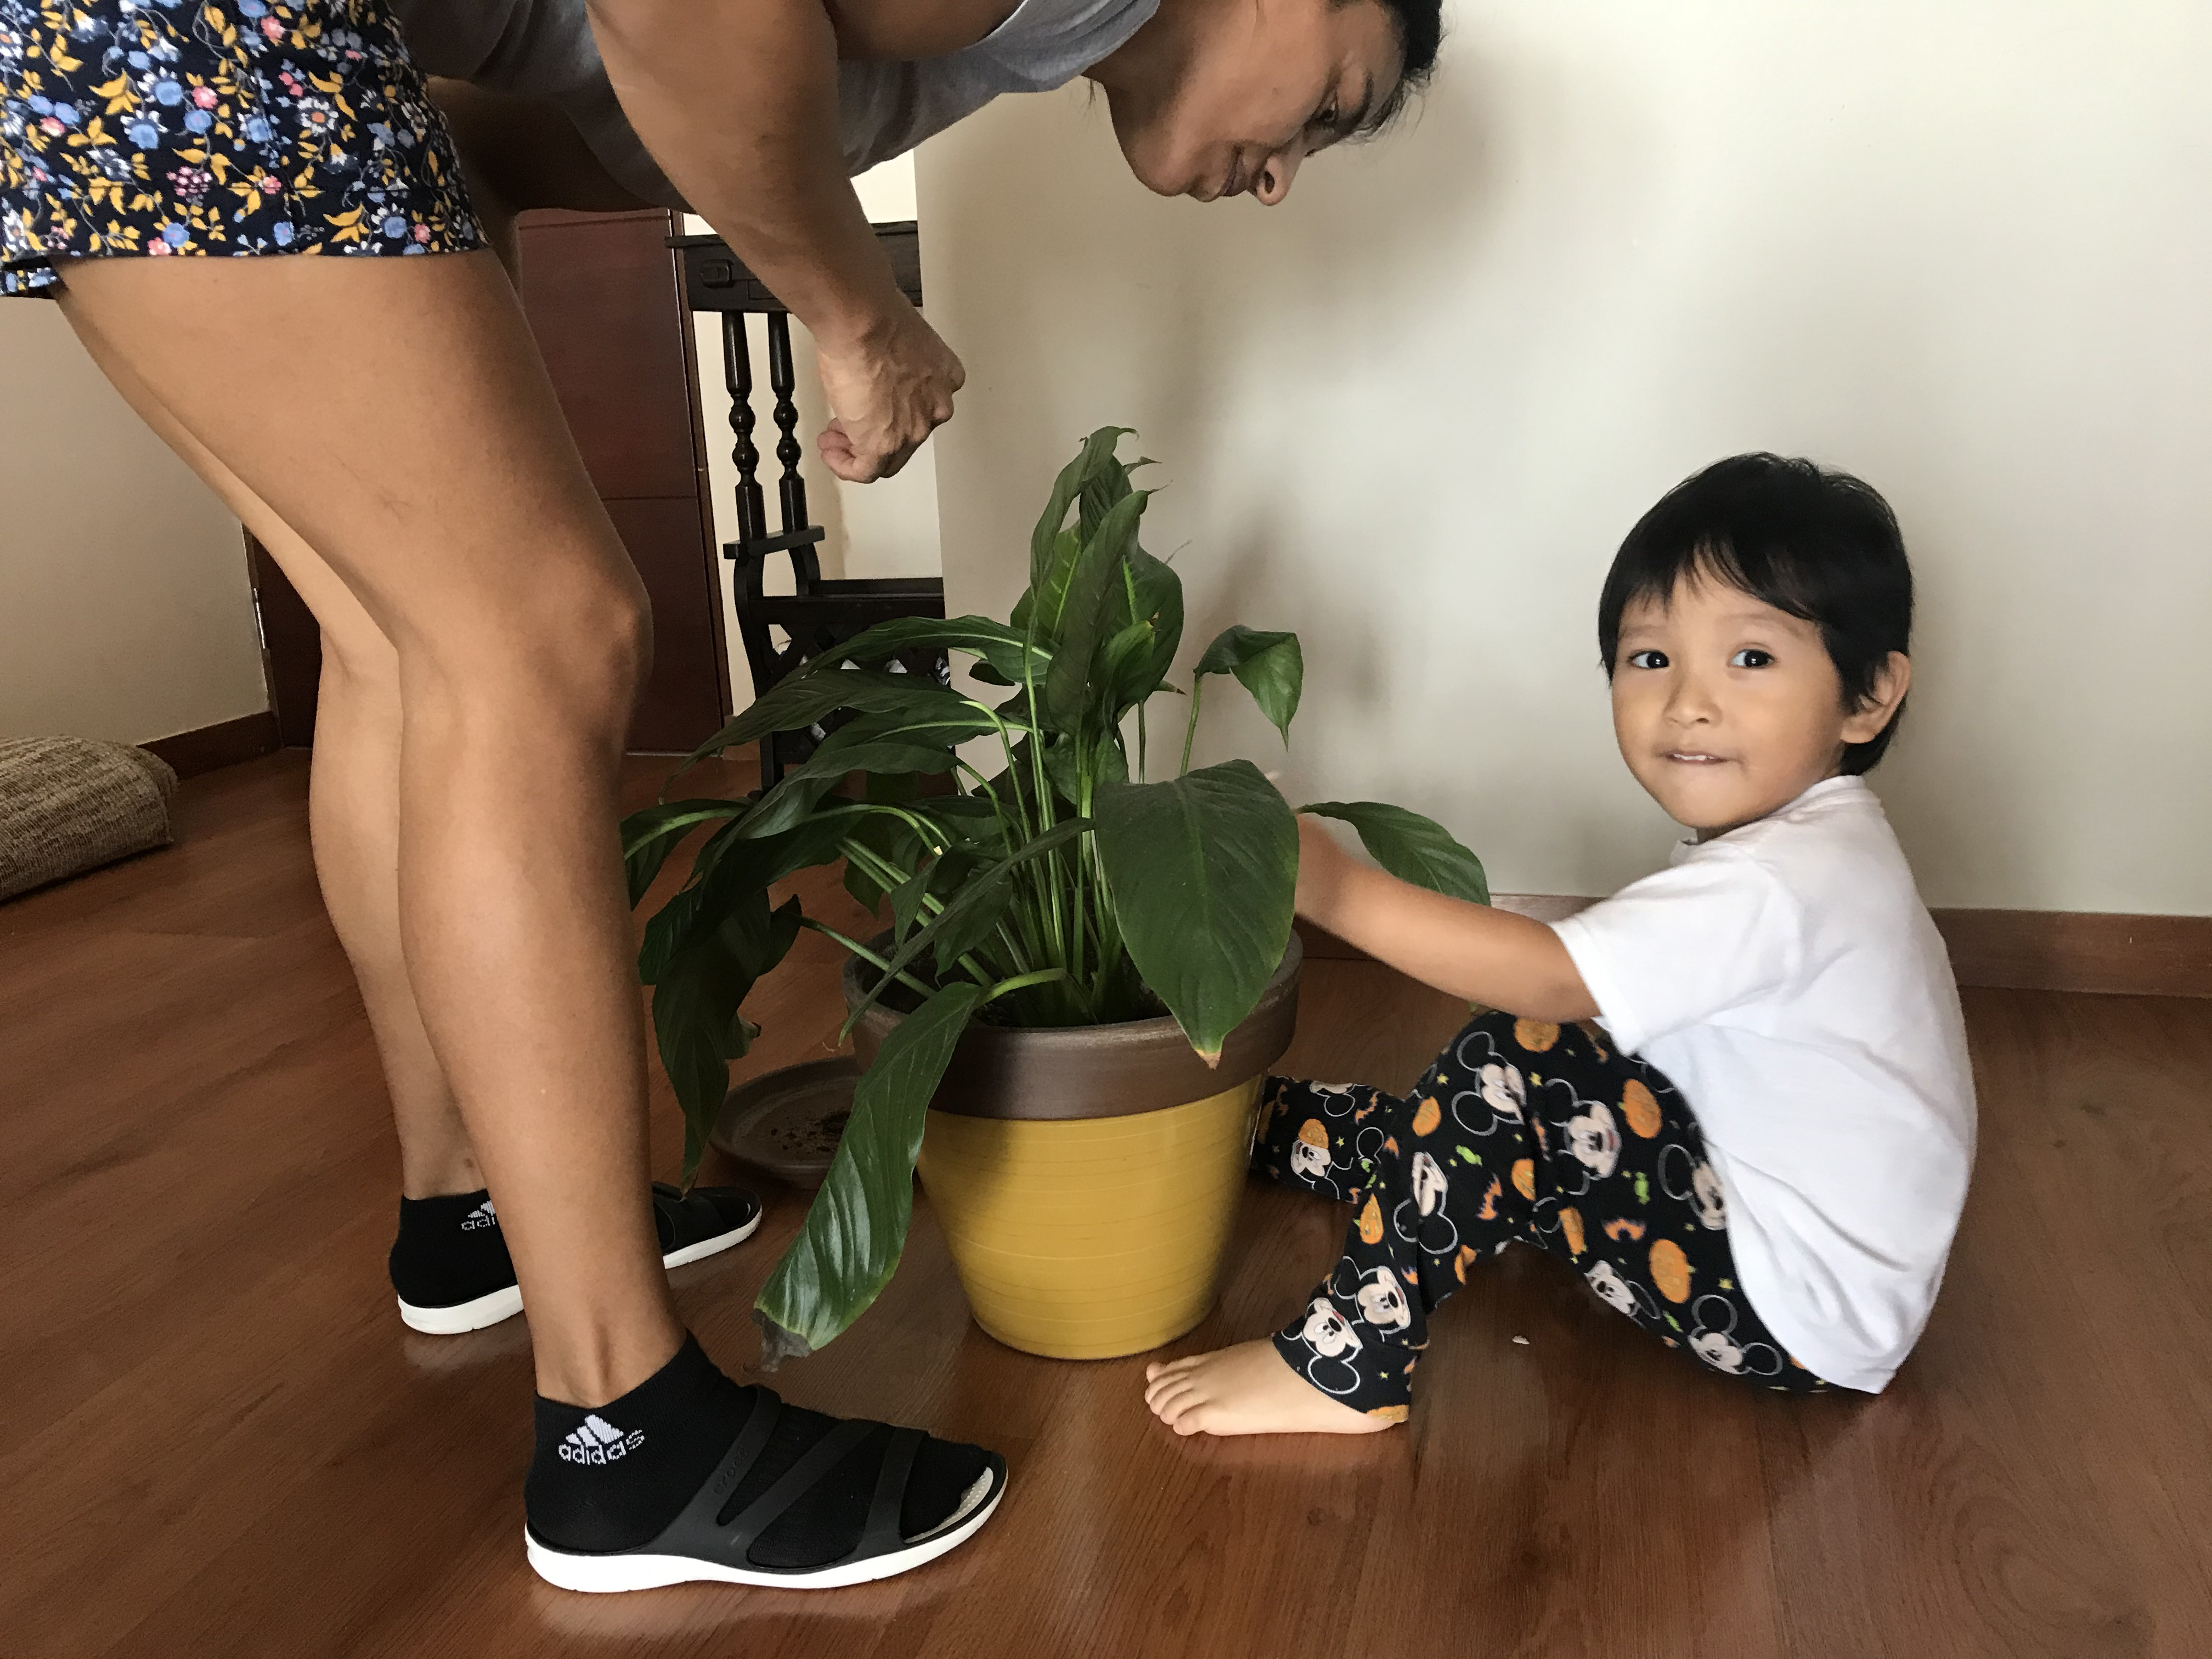 Jenny teaches her son Thiago about tending to the soil.